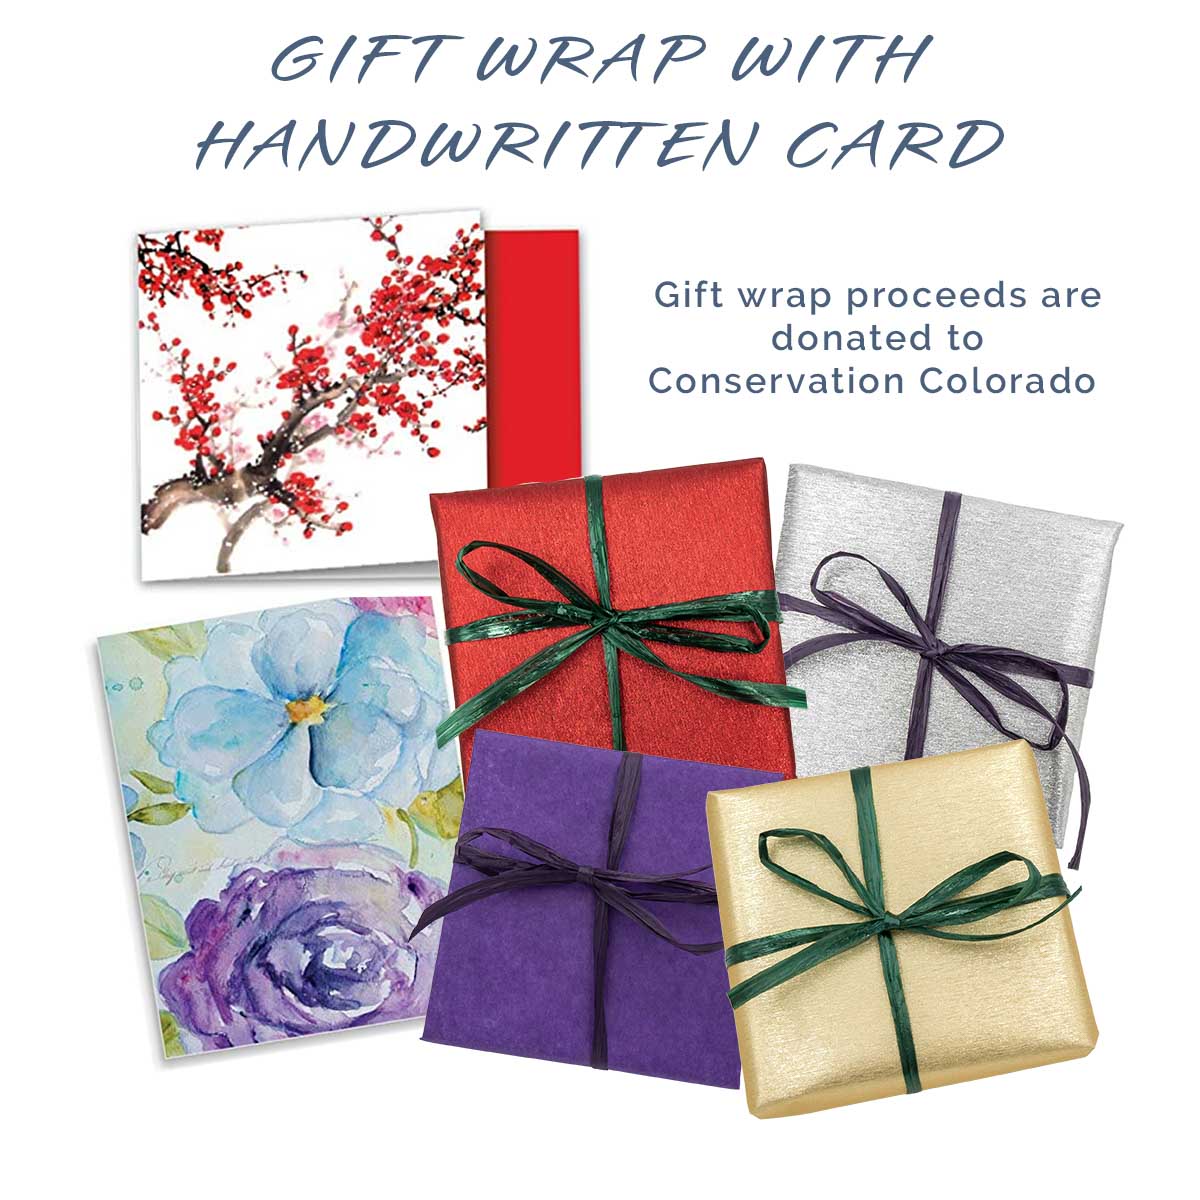 Earth Song Jewelry gift wrap for birthdays and holidays - proceeds are donated to Conservatin Colorado!